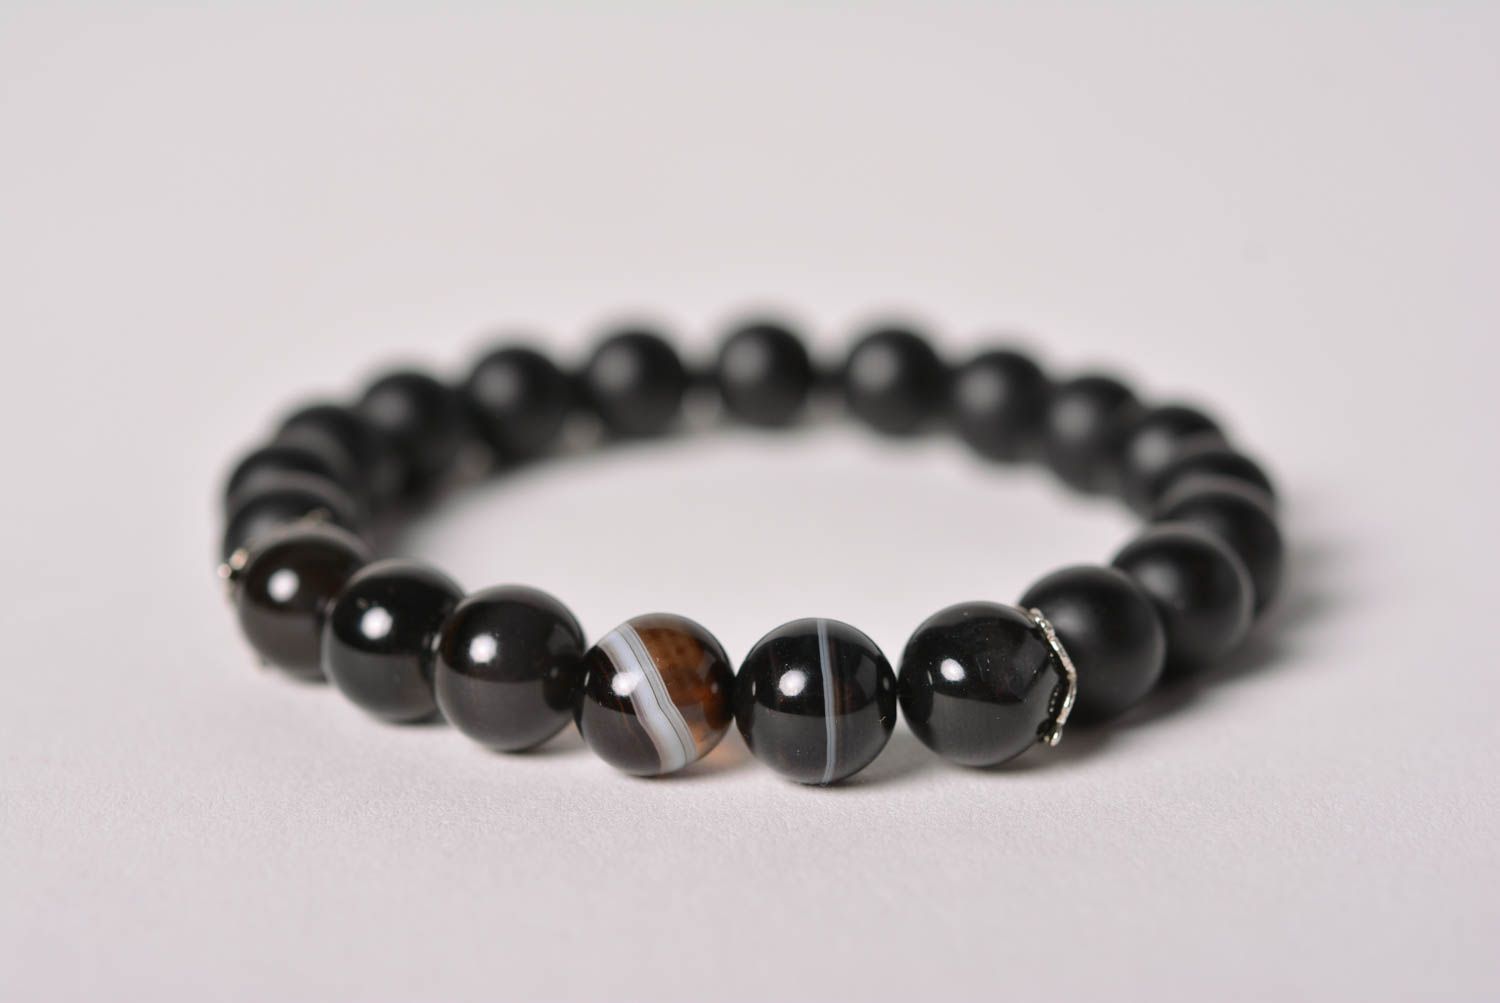 Handmade laconic wrist bracelet with natural black agate stone beads for women photo 4